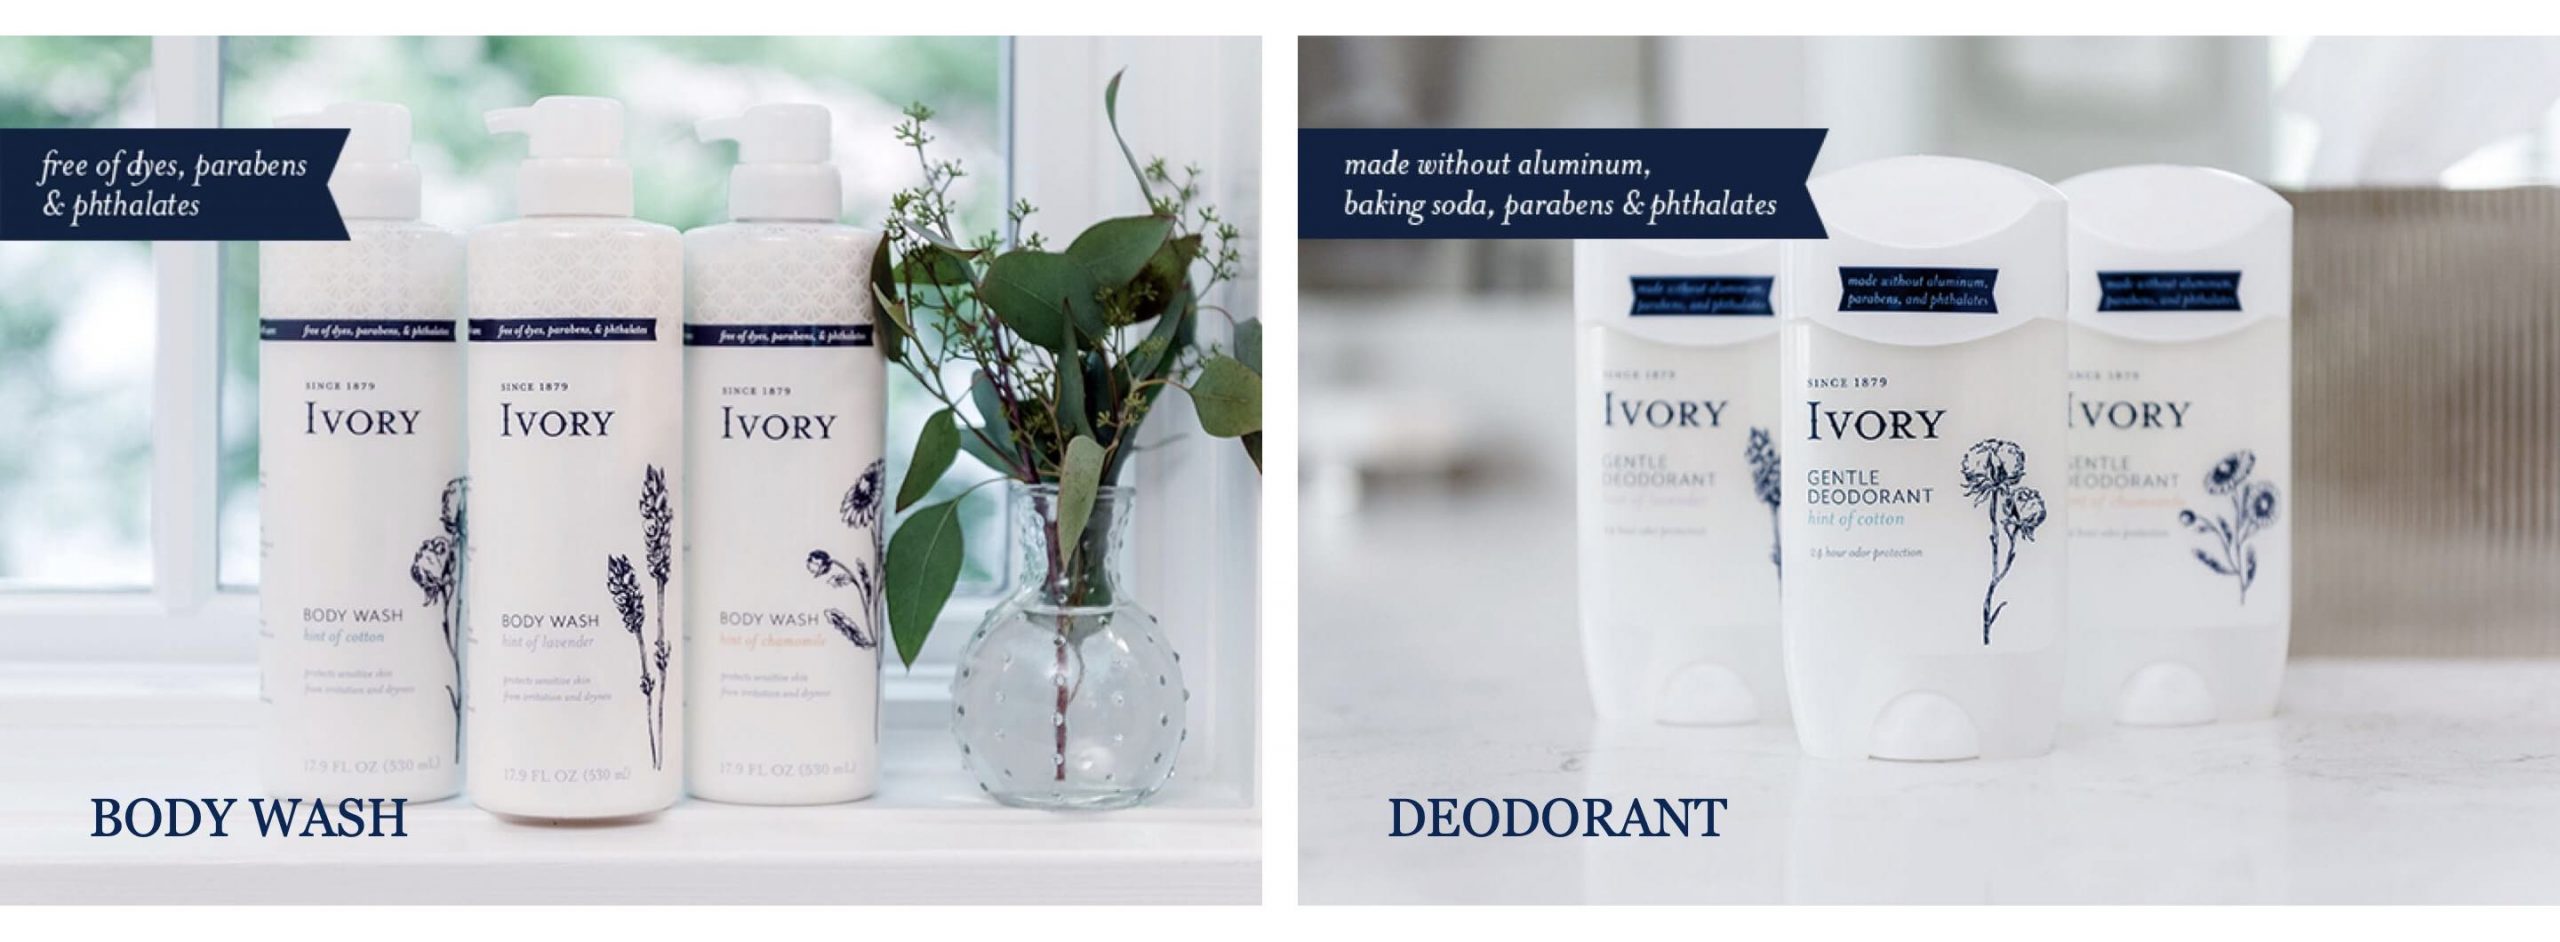 Image from Ivory.com showing two images: (a) three bottles of body wash and (b) three deodorant sticks.